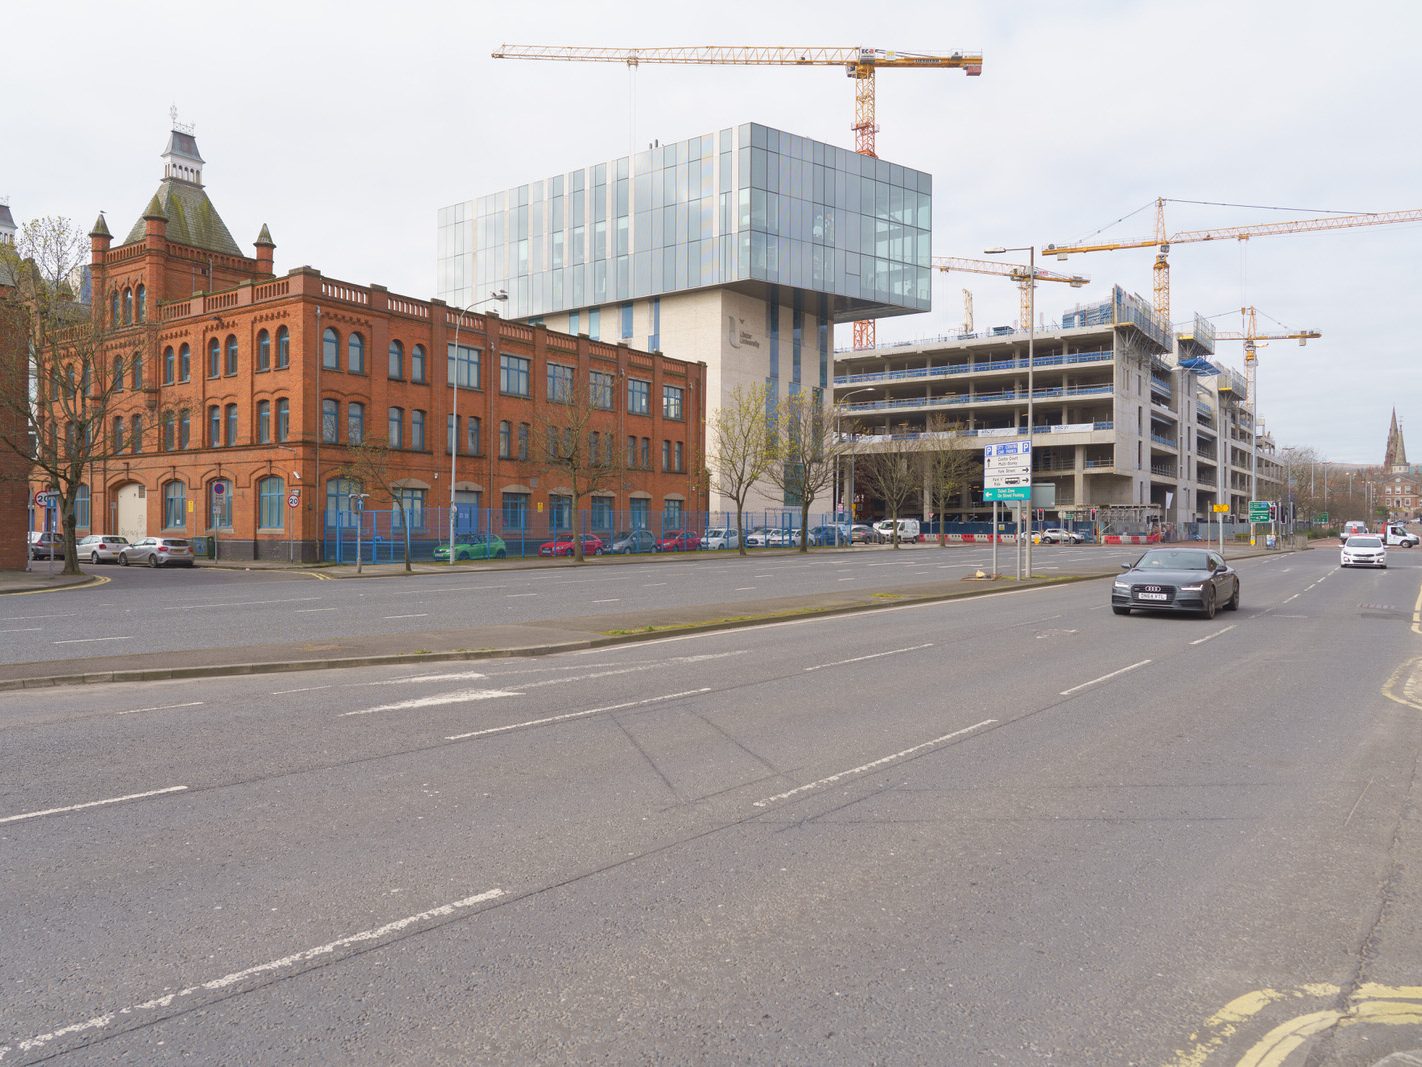 NEW ULSTER UNIVERSITY CAMPUS IN BELFAST [WAS VERY MUCH A WORK IN PROGRESS IN MARCH 2019]-224616-1